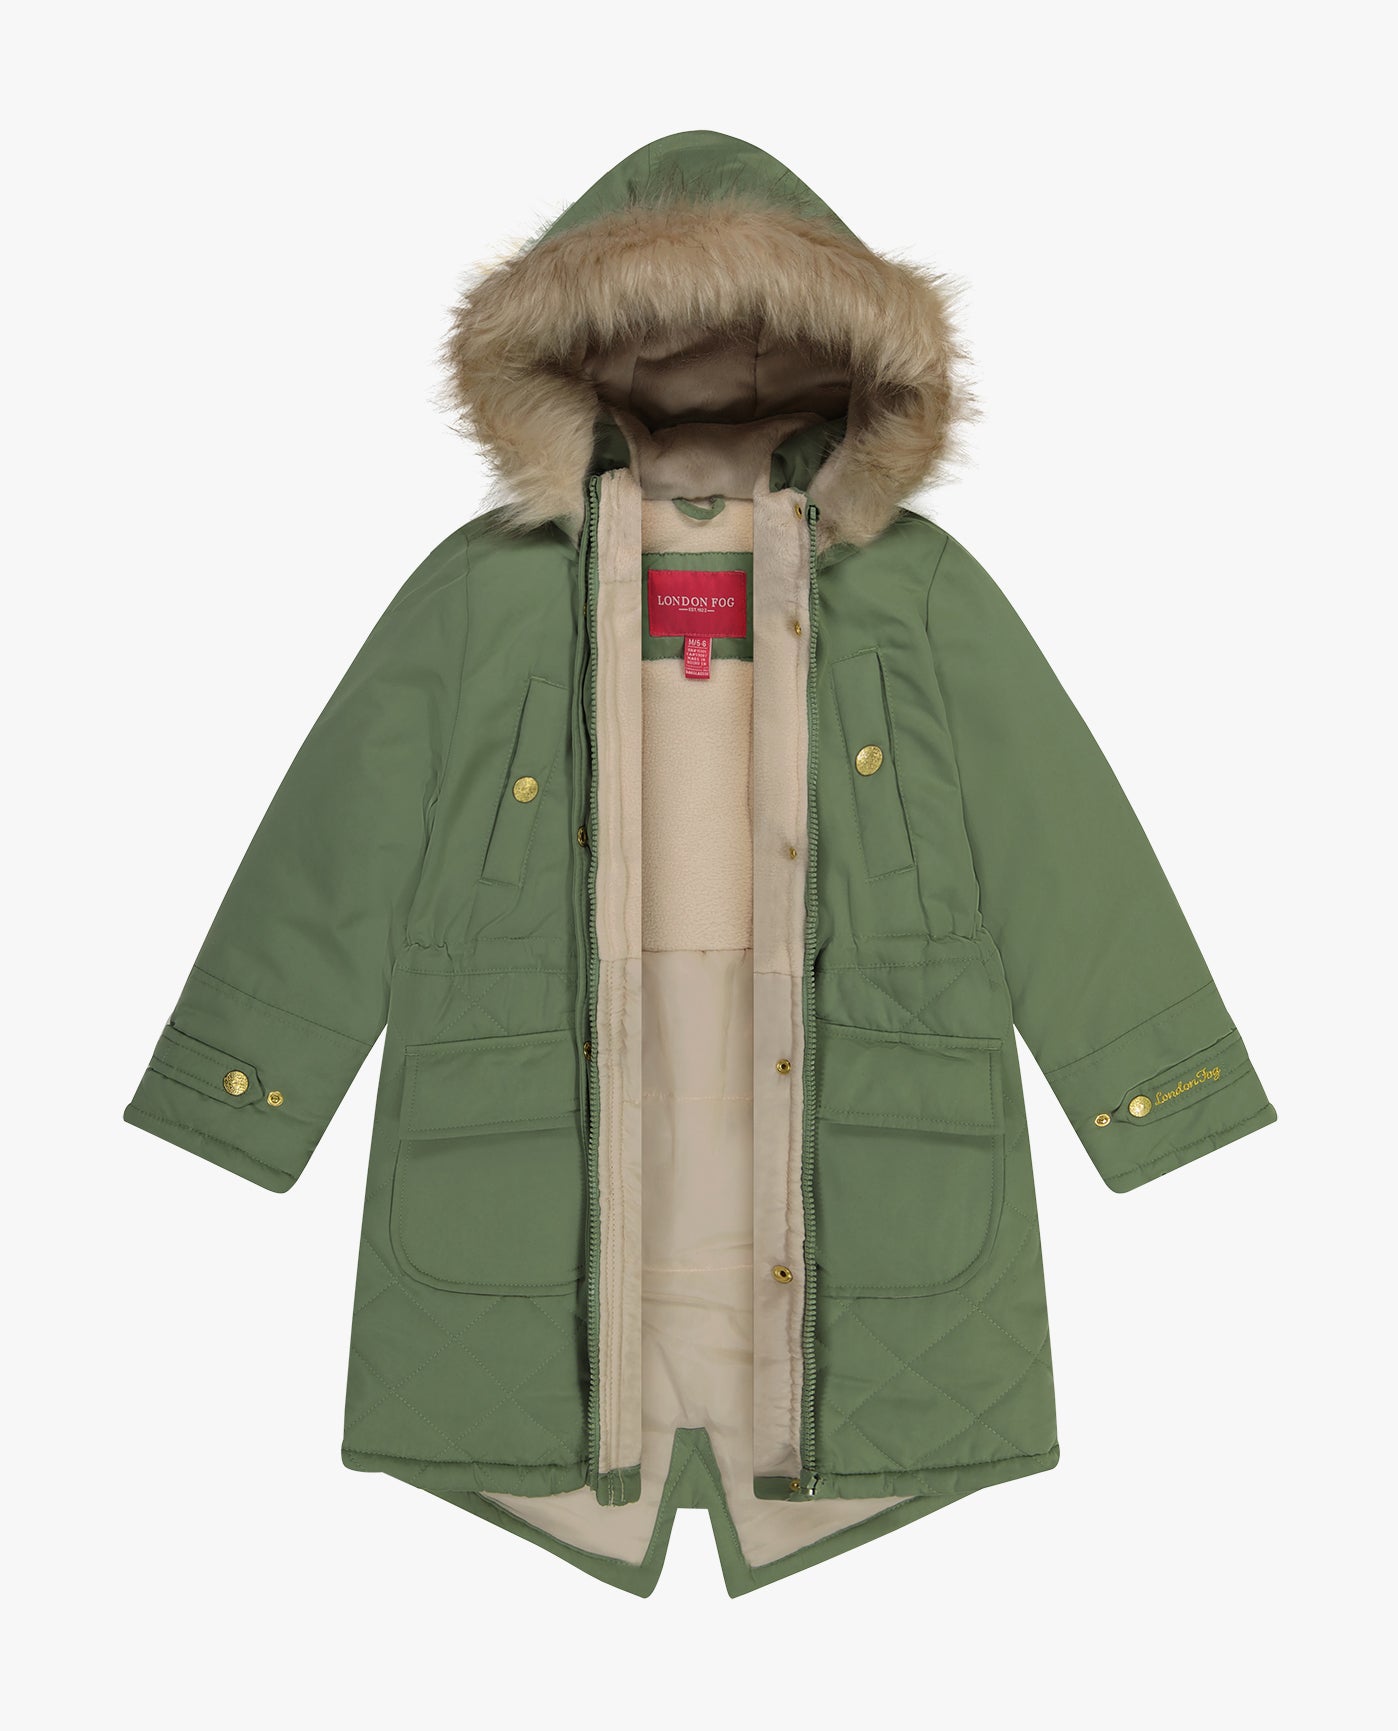 Detail View Of BIG GIRLS ZIP-FRONT MID CINCH QUILTED PARKA WITH FUR TRIMMED HOOD | OLIVE